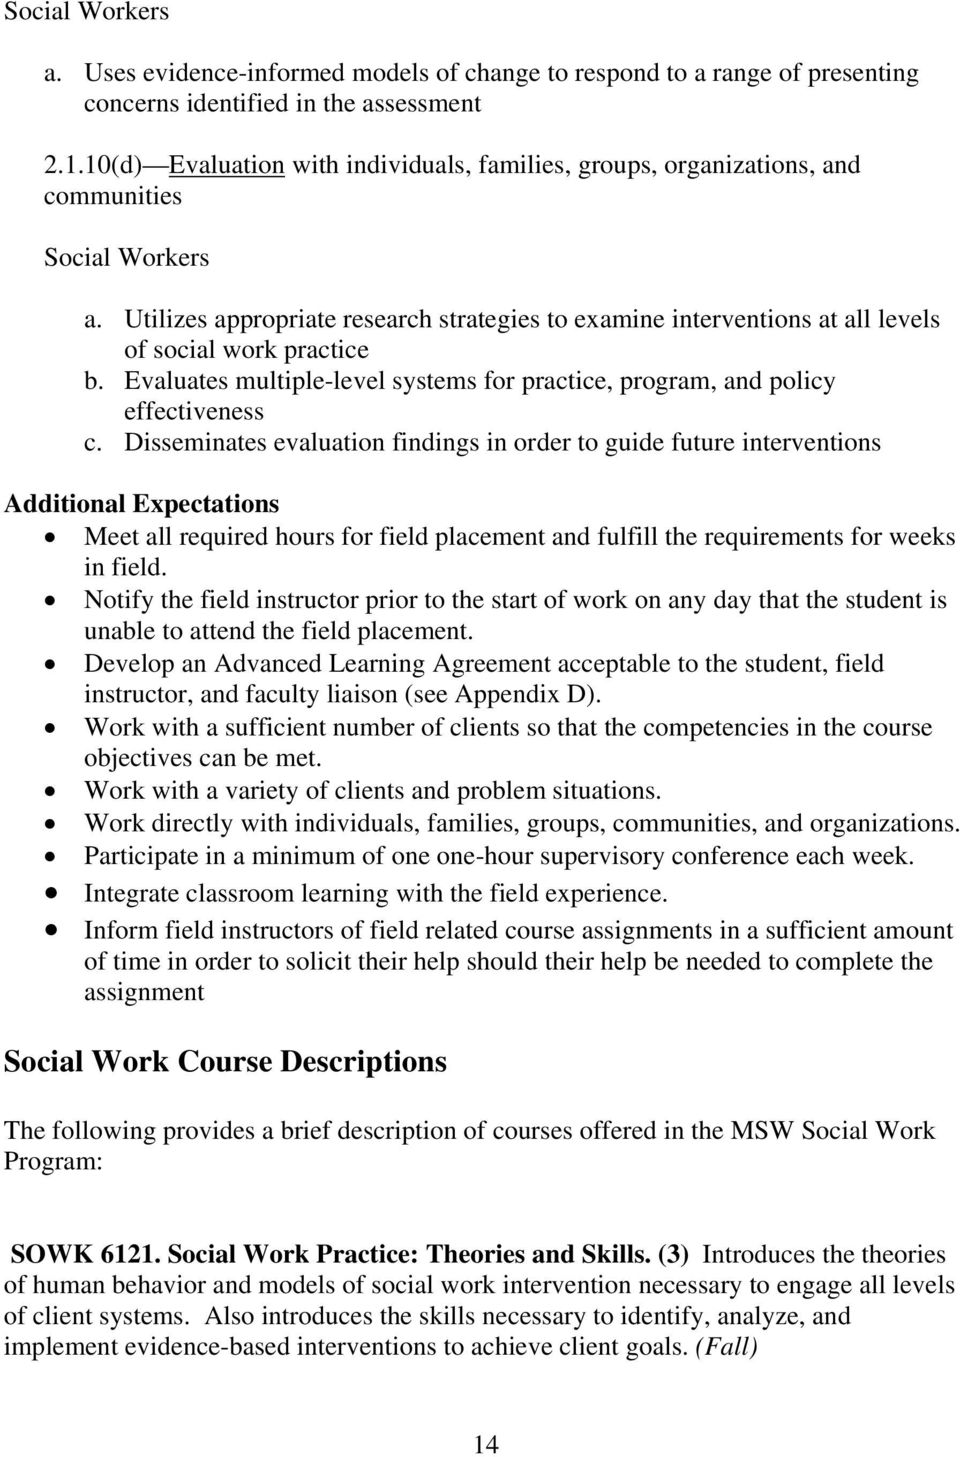 Utilizes appropriate research strategies to examine interventions at all levels of social work practice b. Evaluates multiple-level systems for practice, program, and policy effectiveness c.